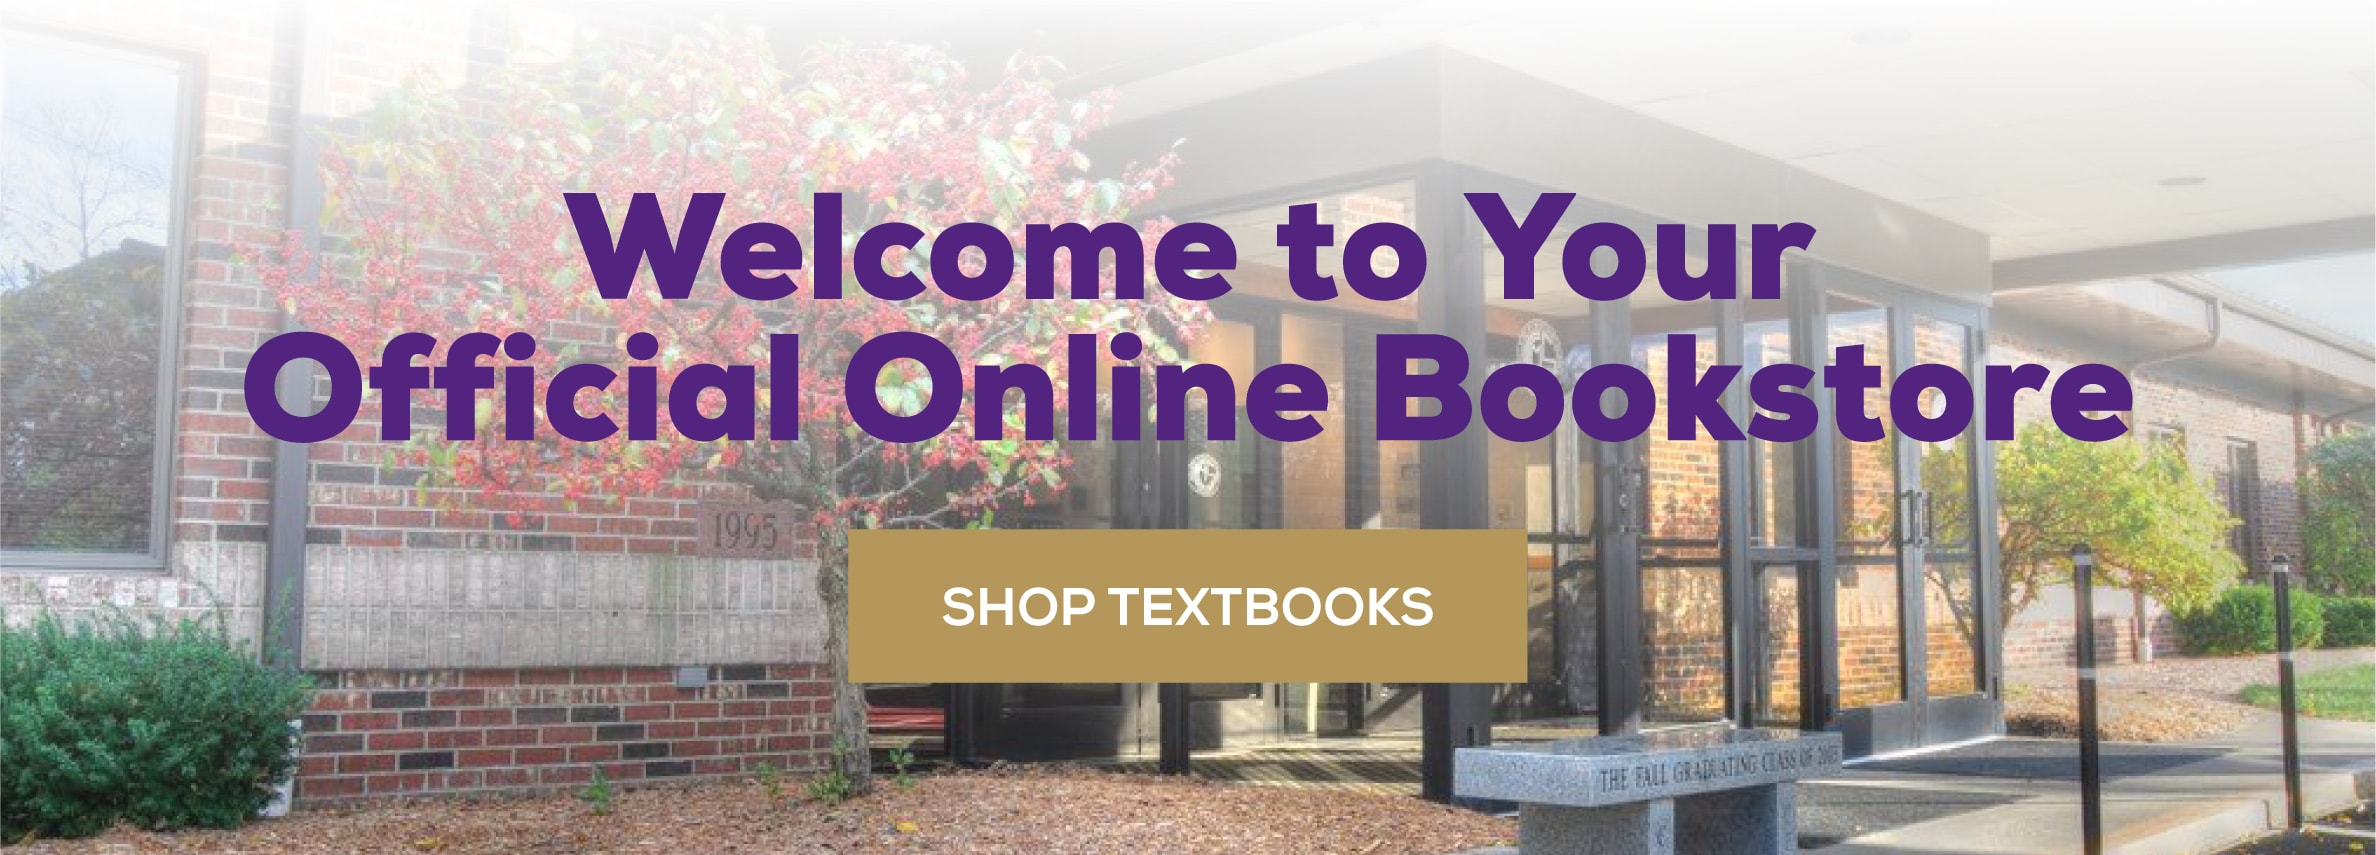 Welcome to your official online bookstore. Shop Textbooks.